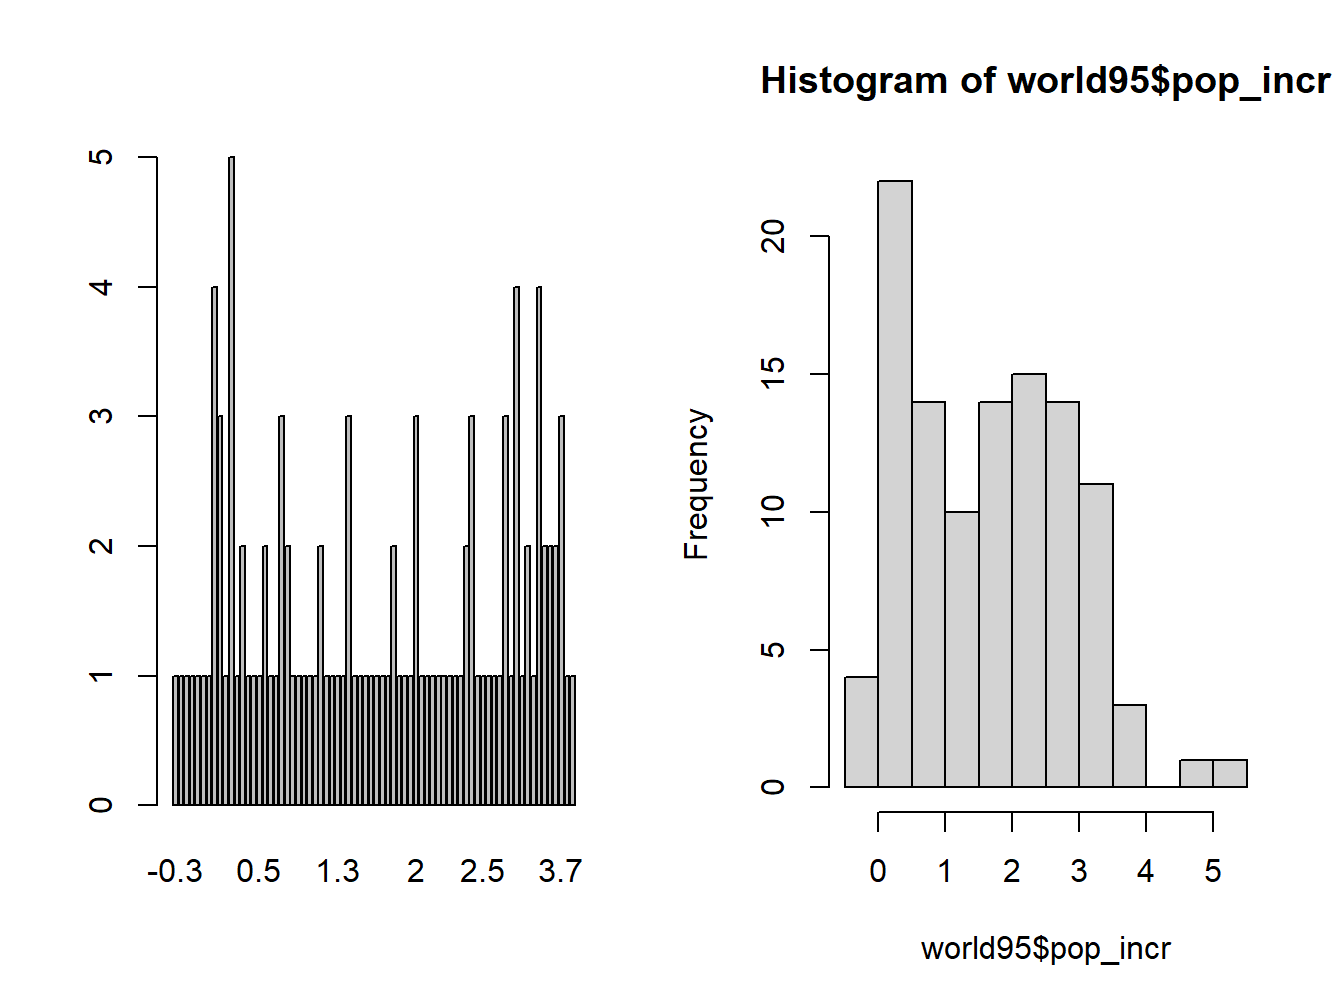 Comparing Bar chart with Histogram